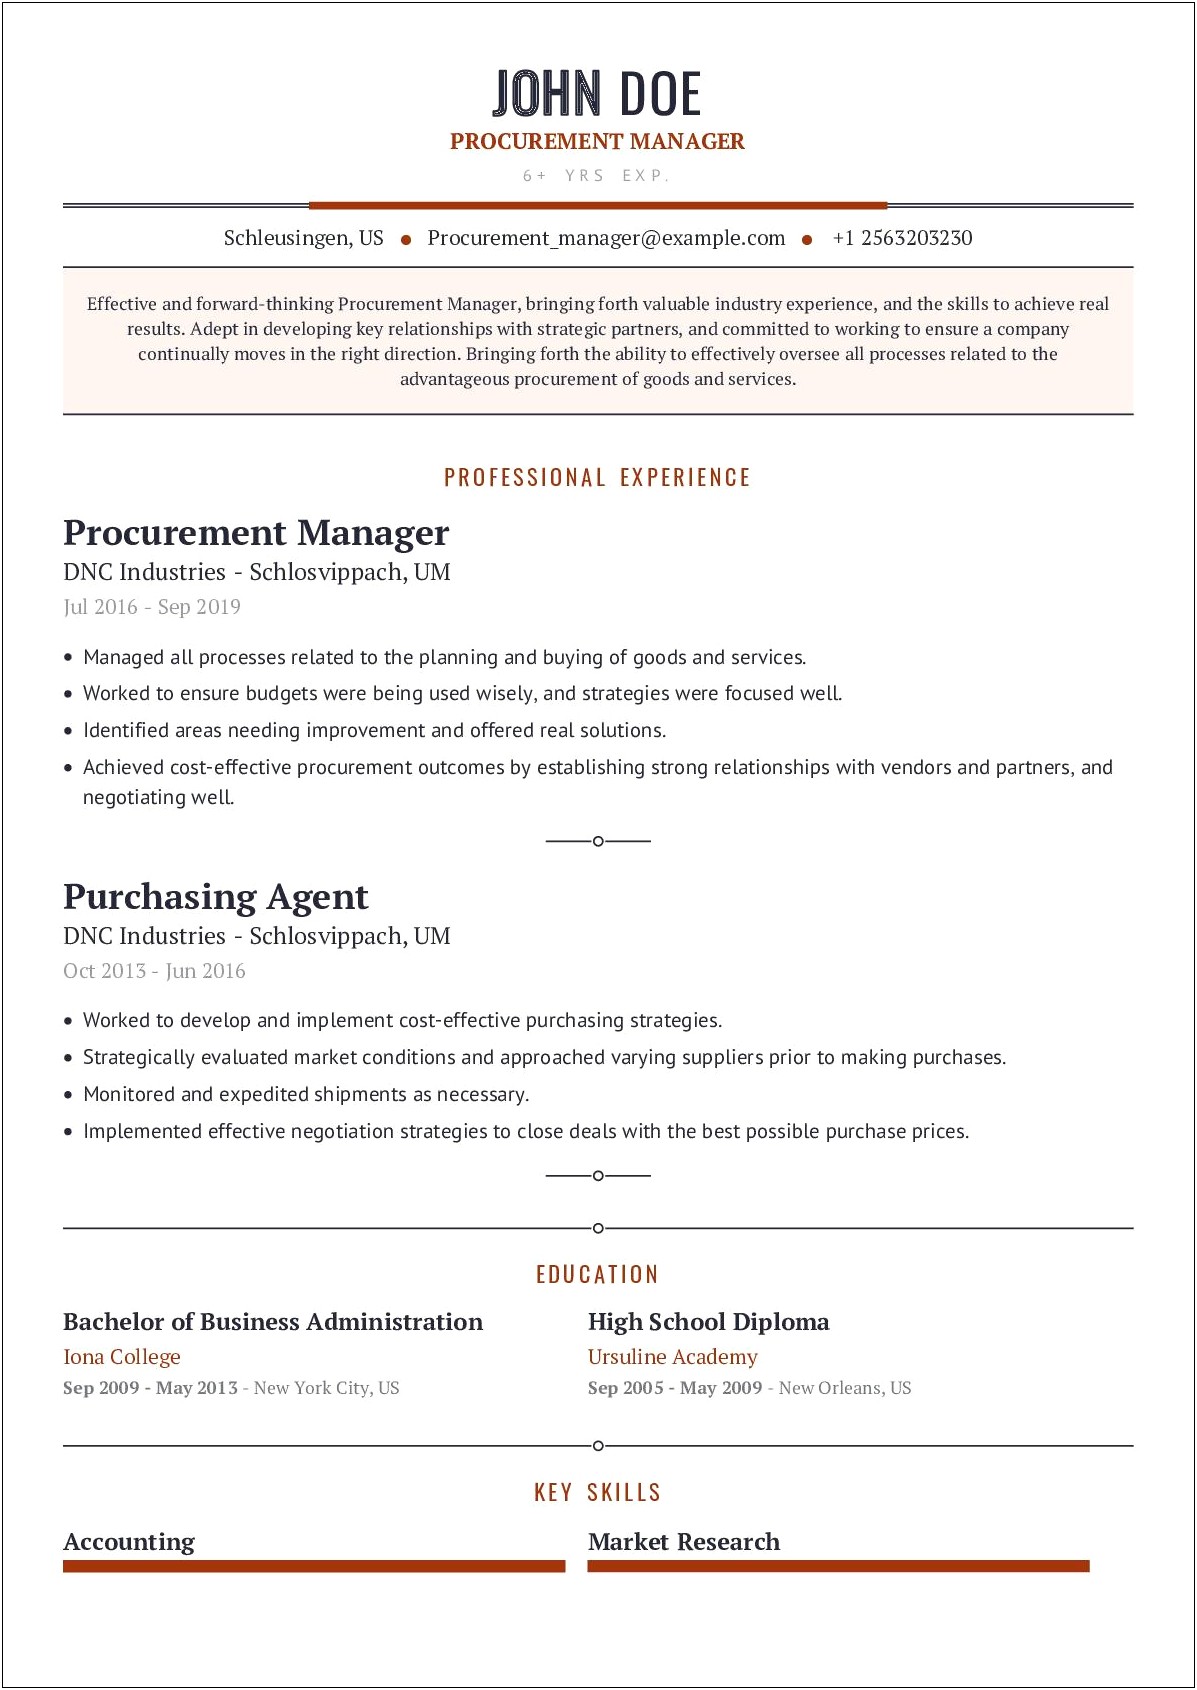 Management Skills And Abilities On Resume